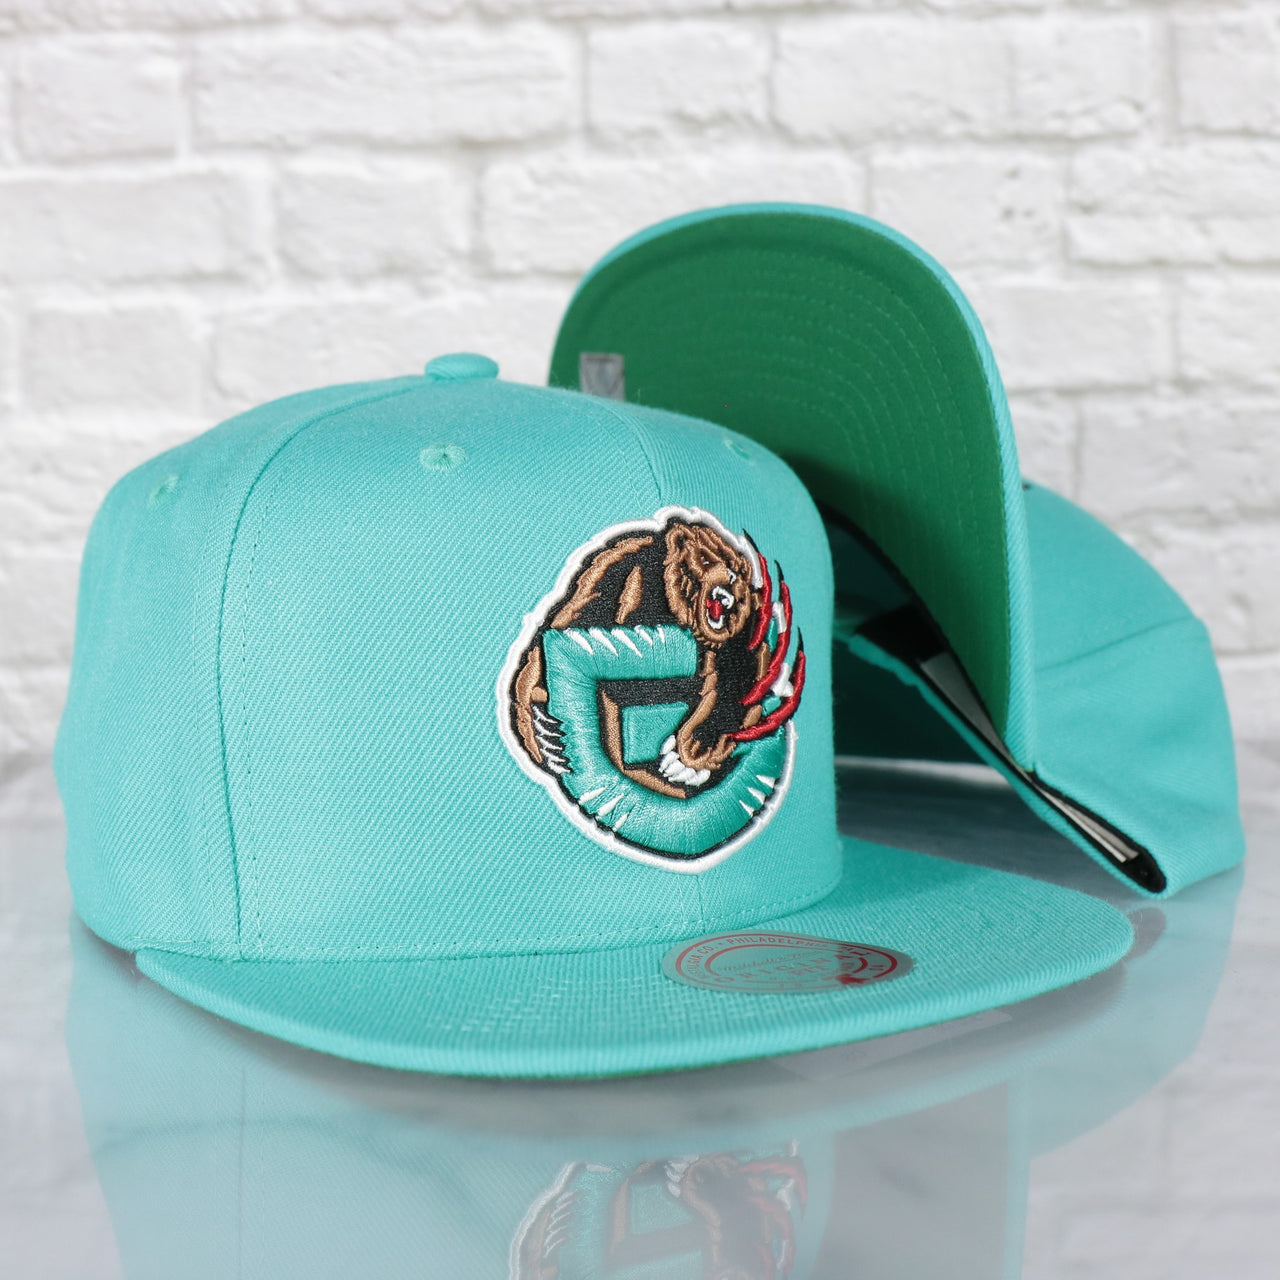 Vancouver Grizzlies Vintage Retro NBA Team Ground 2.0 Mitchell and Ness Snapback Hat | Teal